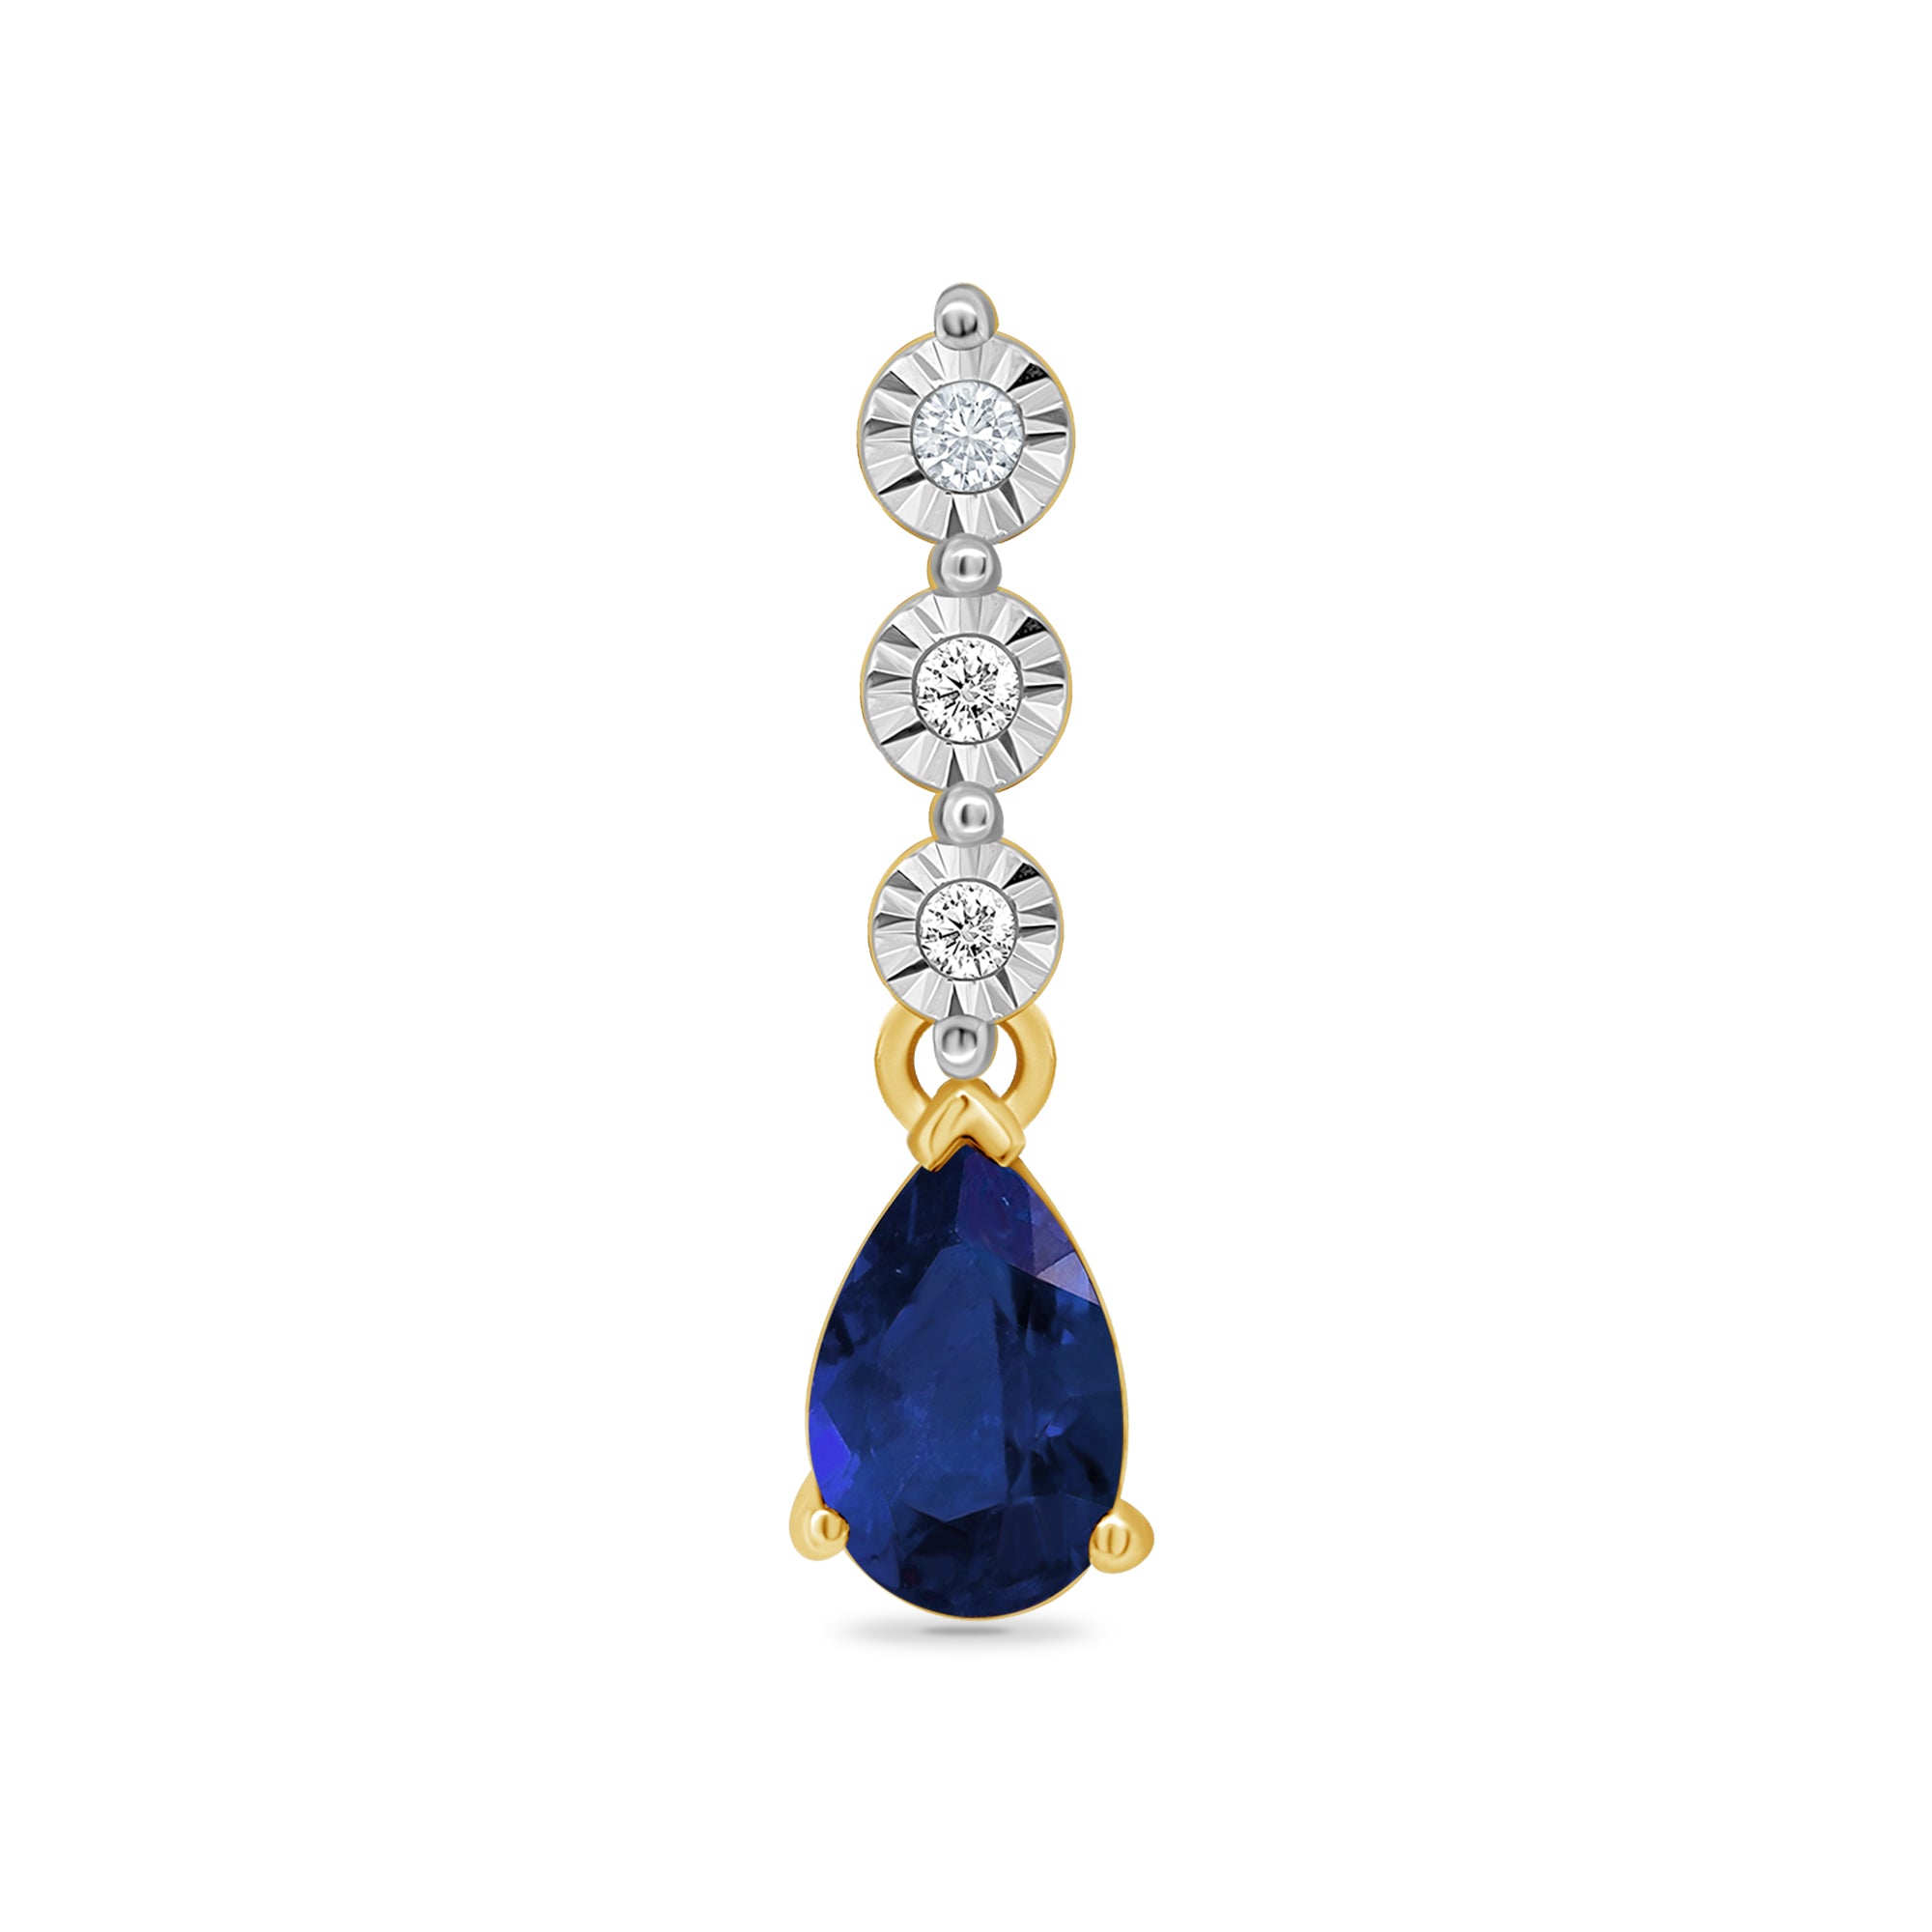 9ct gold 6x4mm pear shape sapphire & miracle plate diamond pendant 0.02ct